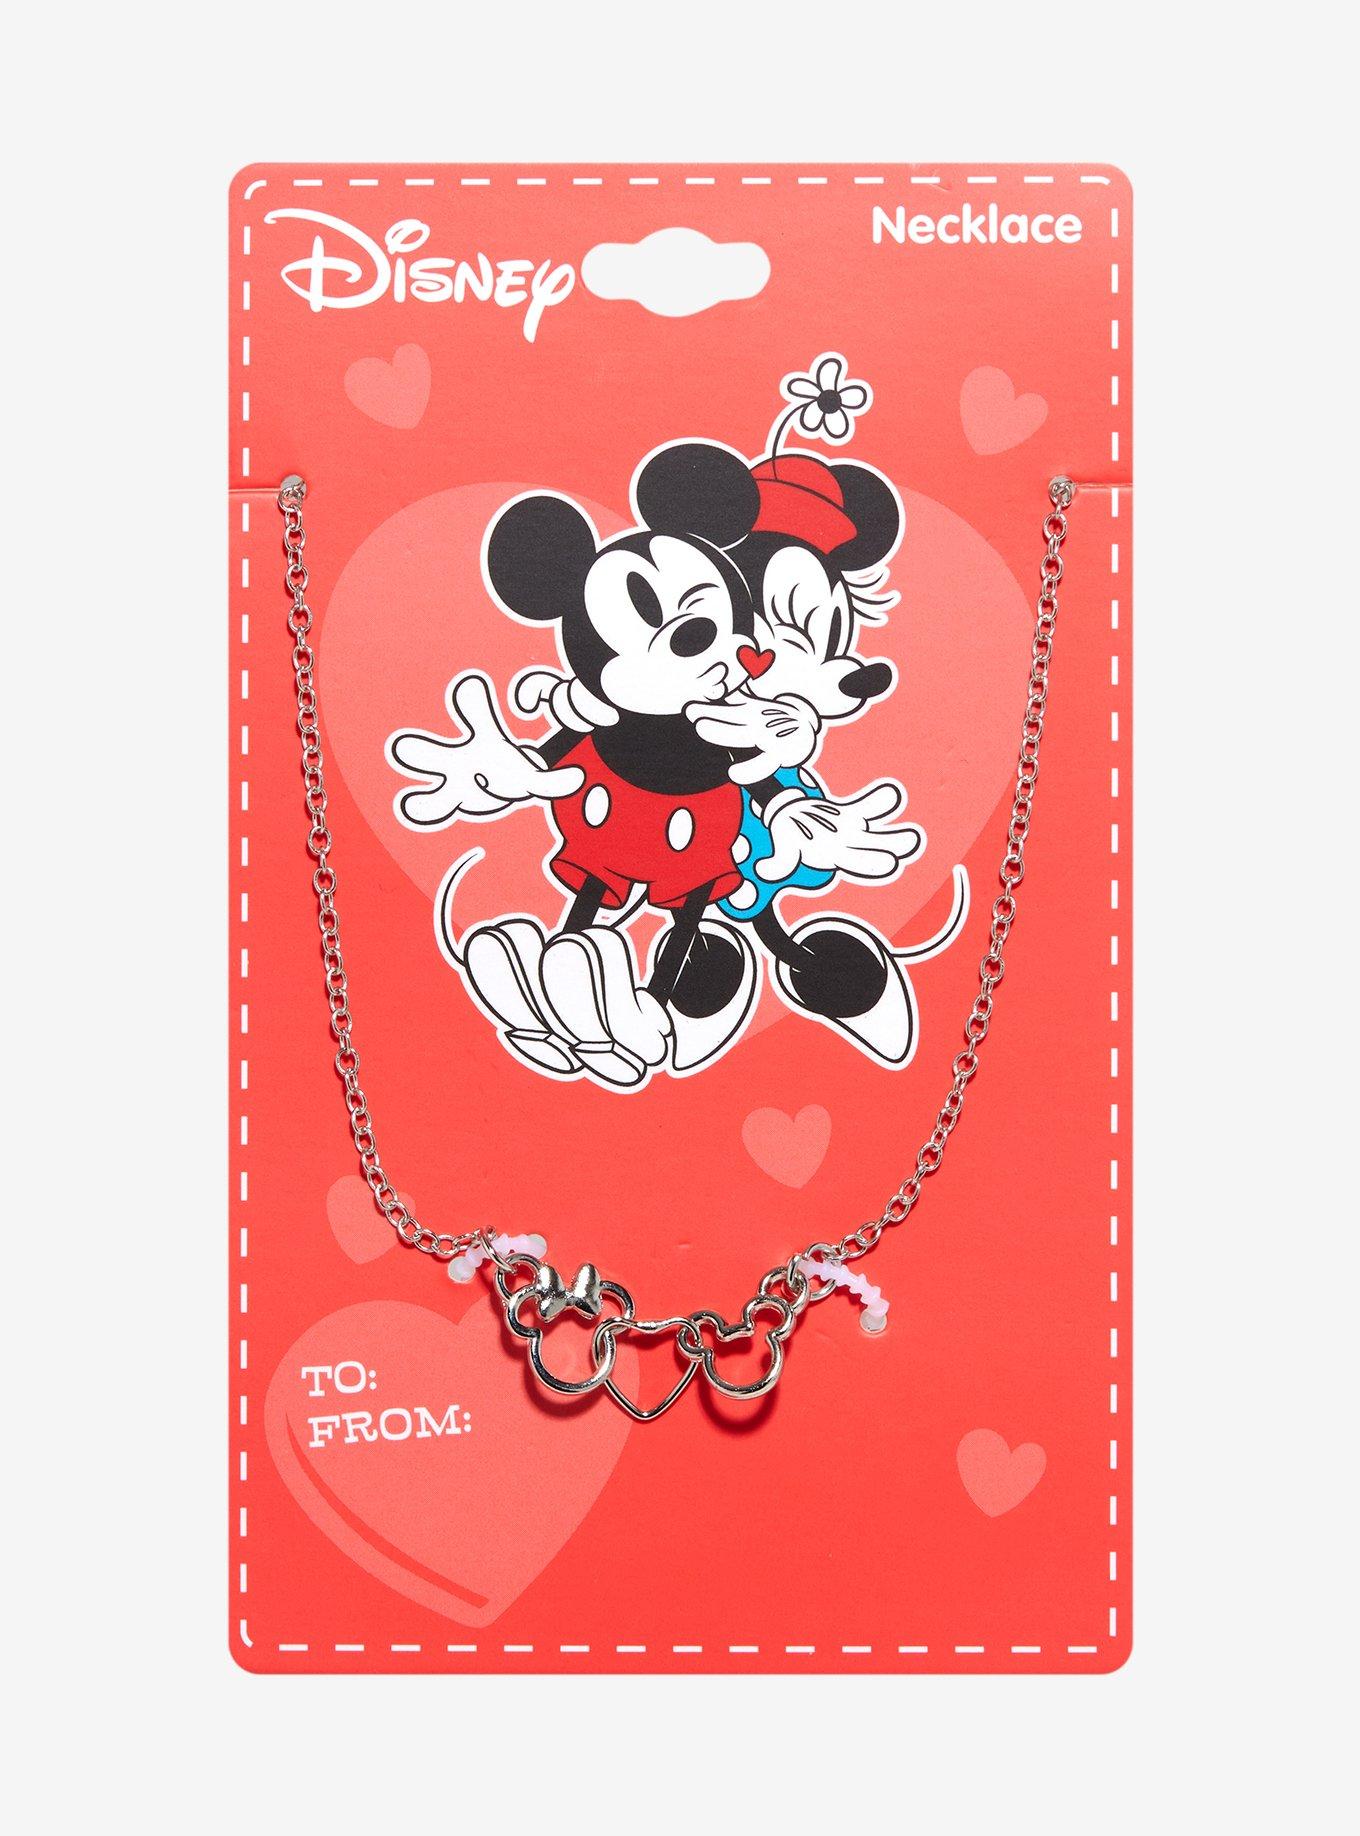 Disney, Accessories, Nwt Mickey Mouse And Minnie Mouse Patches